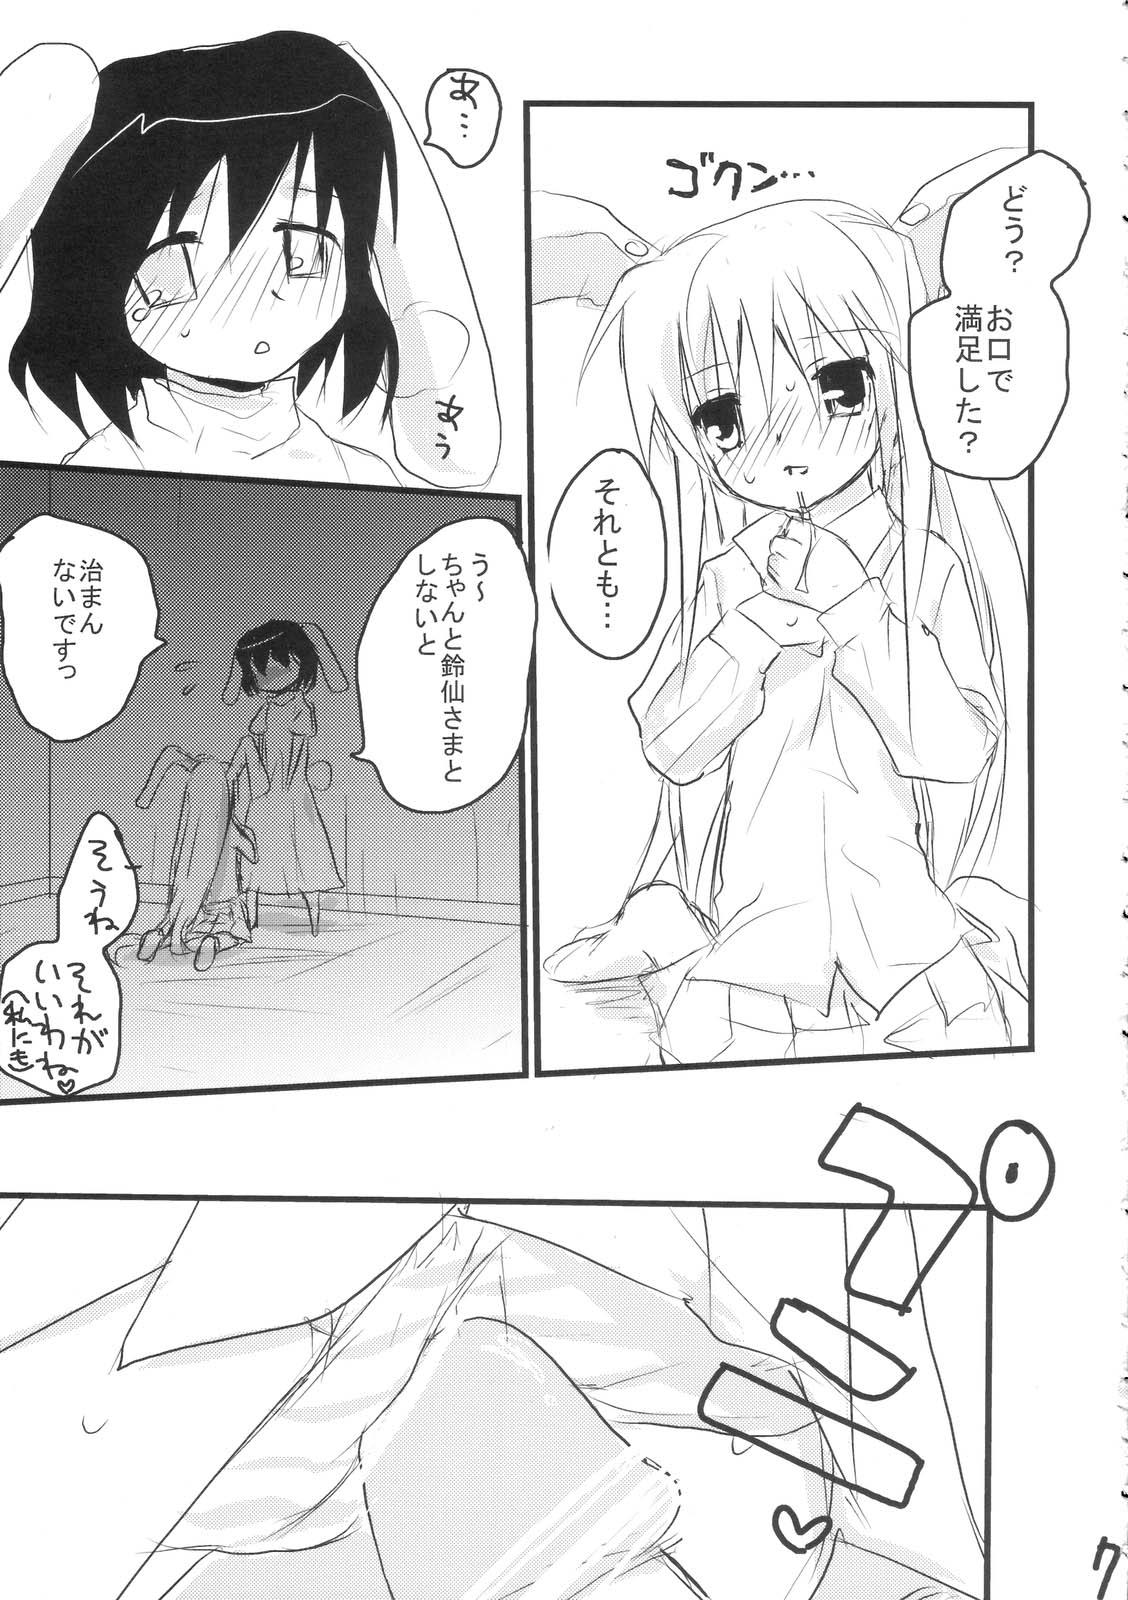 Comendo Uronge Ni - Touhou project Gay Doctor - Page 6